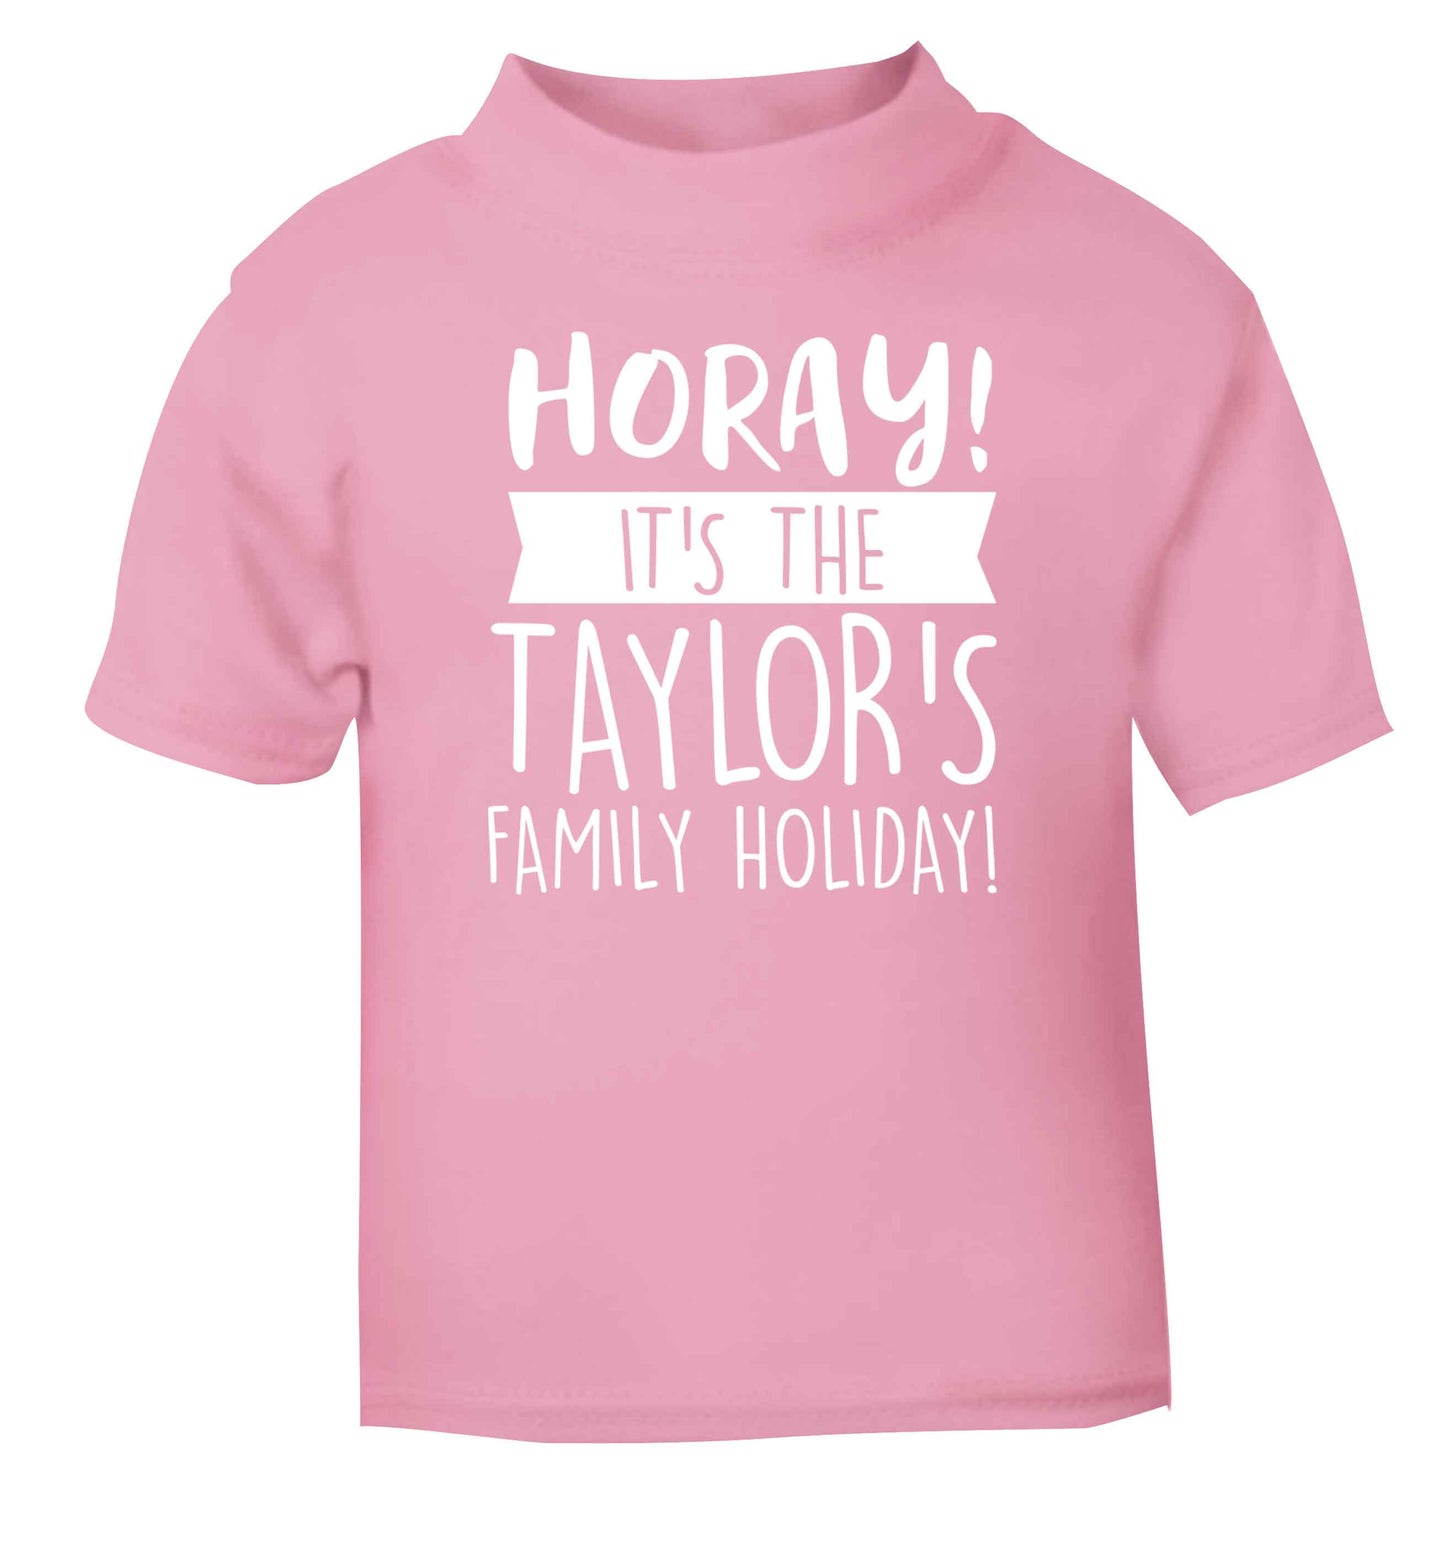 Horay it's the Taylor's family holiday! personalised item light pink Baby Toddler Tshirt 2 Years